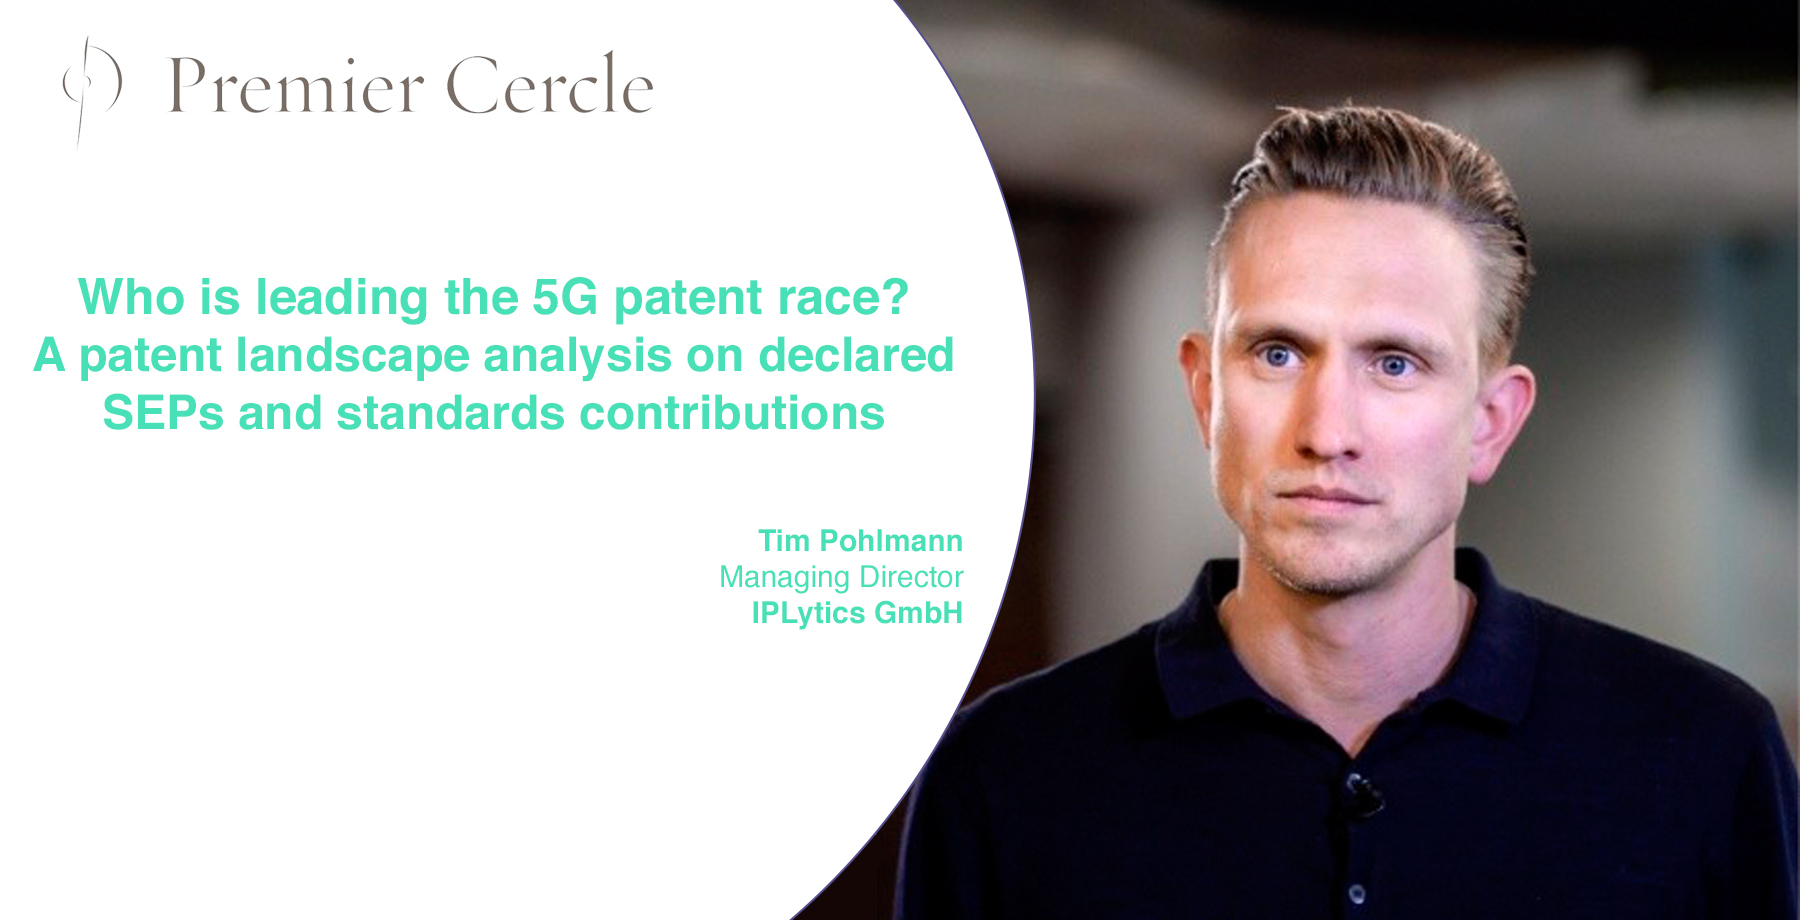 Who is leading the 5G patent race?